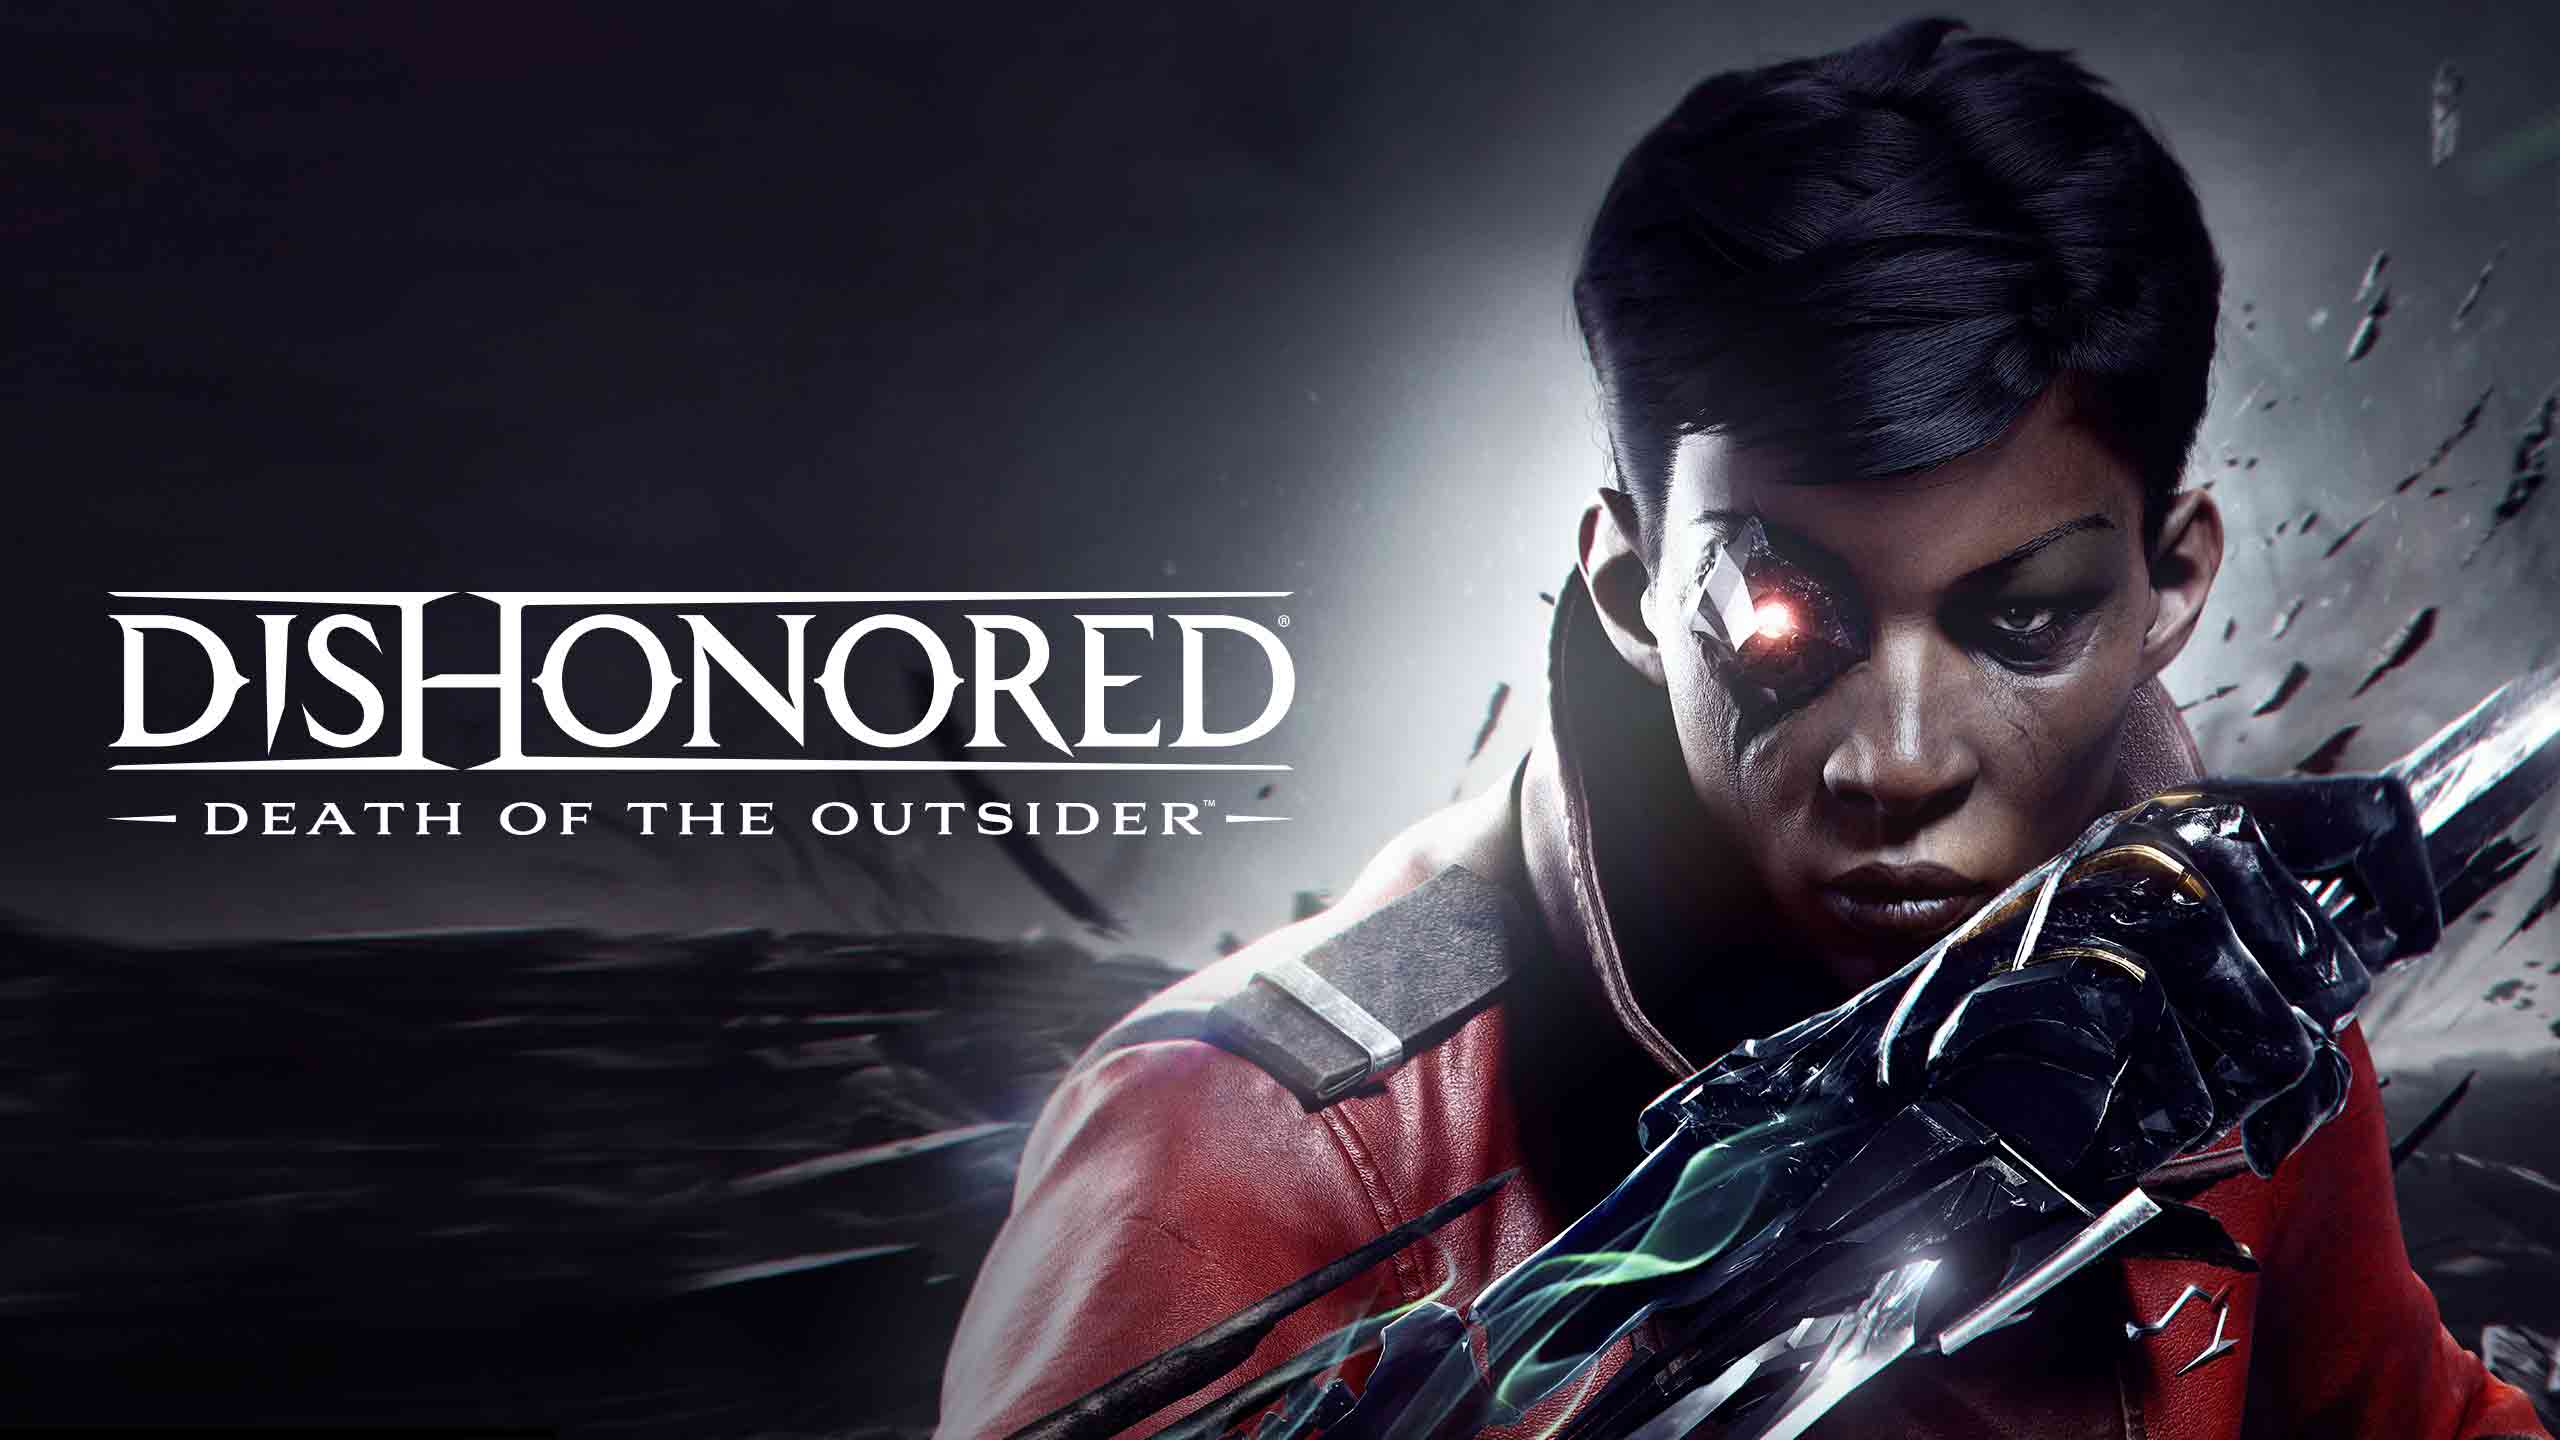 City of Gangsters and Dishonored: Death of the Outsider free at Epic Games Store